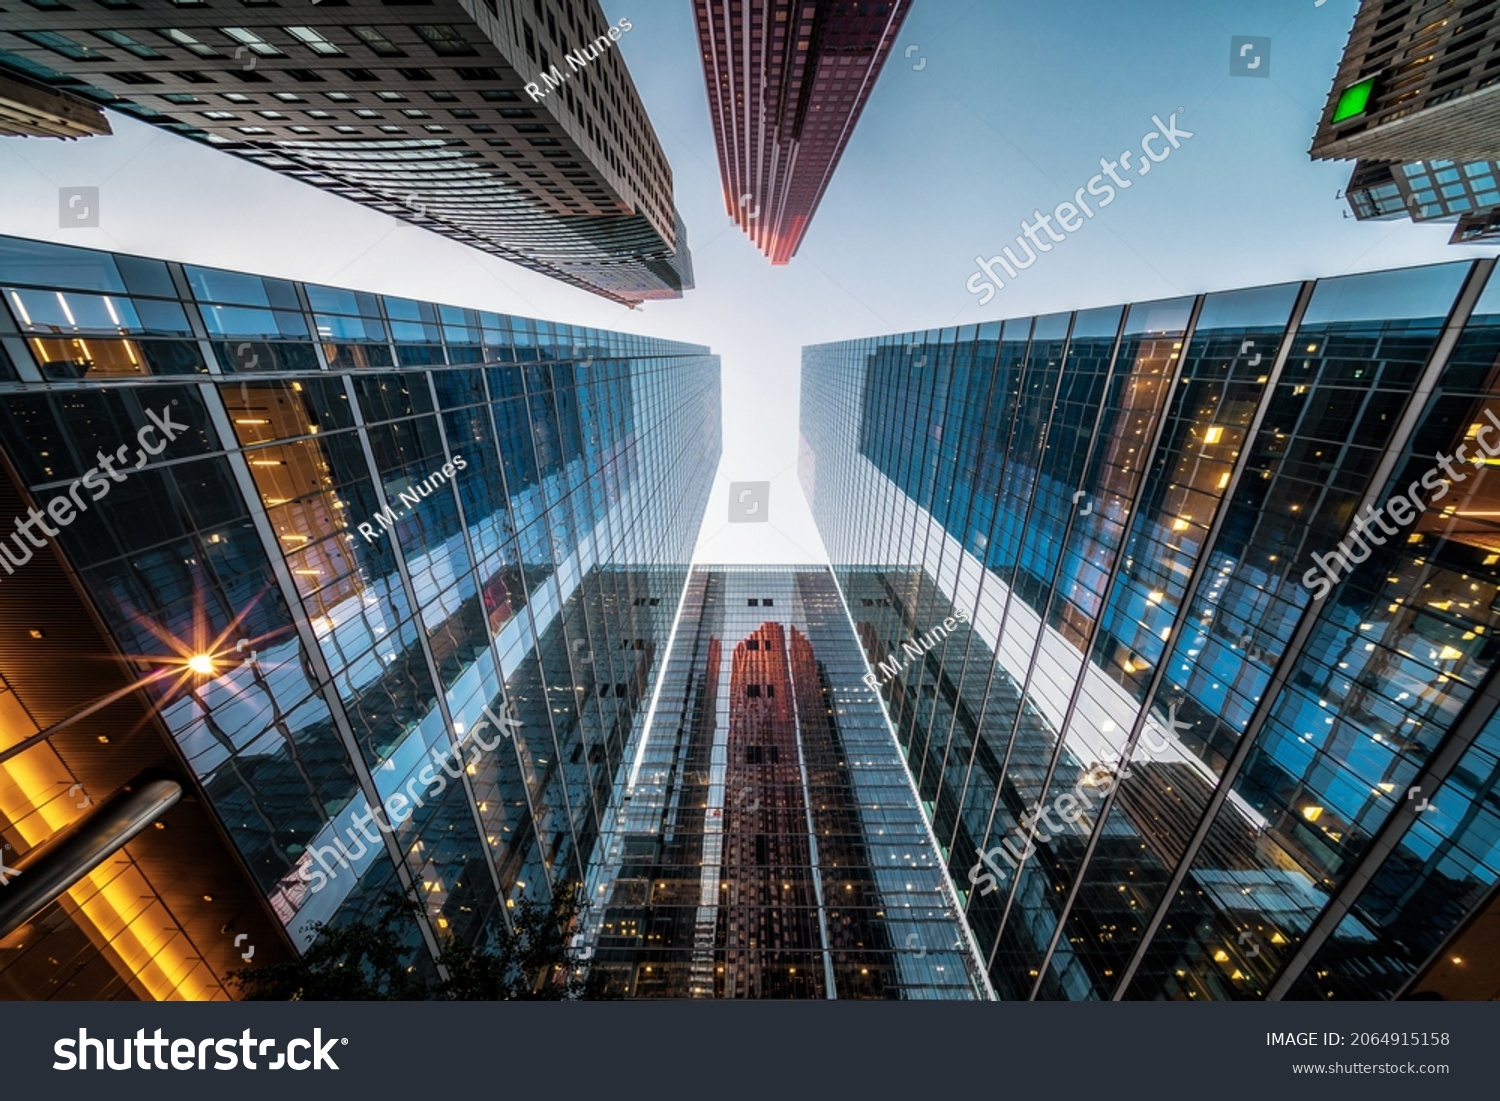 Business and finance concept, looking up at high rise office building architecture in the financial district of a modern metropolis. #2064915158